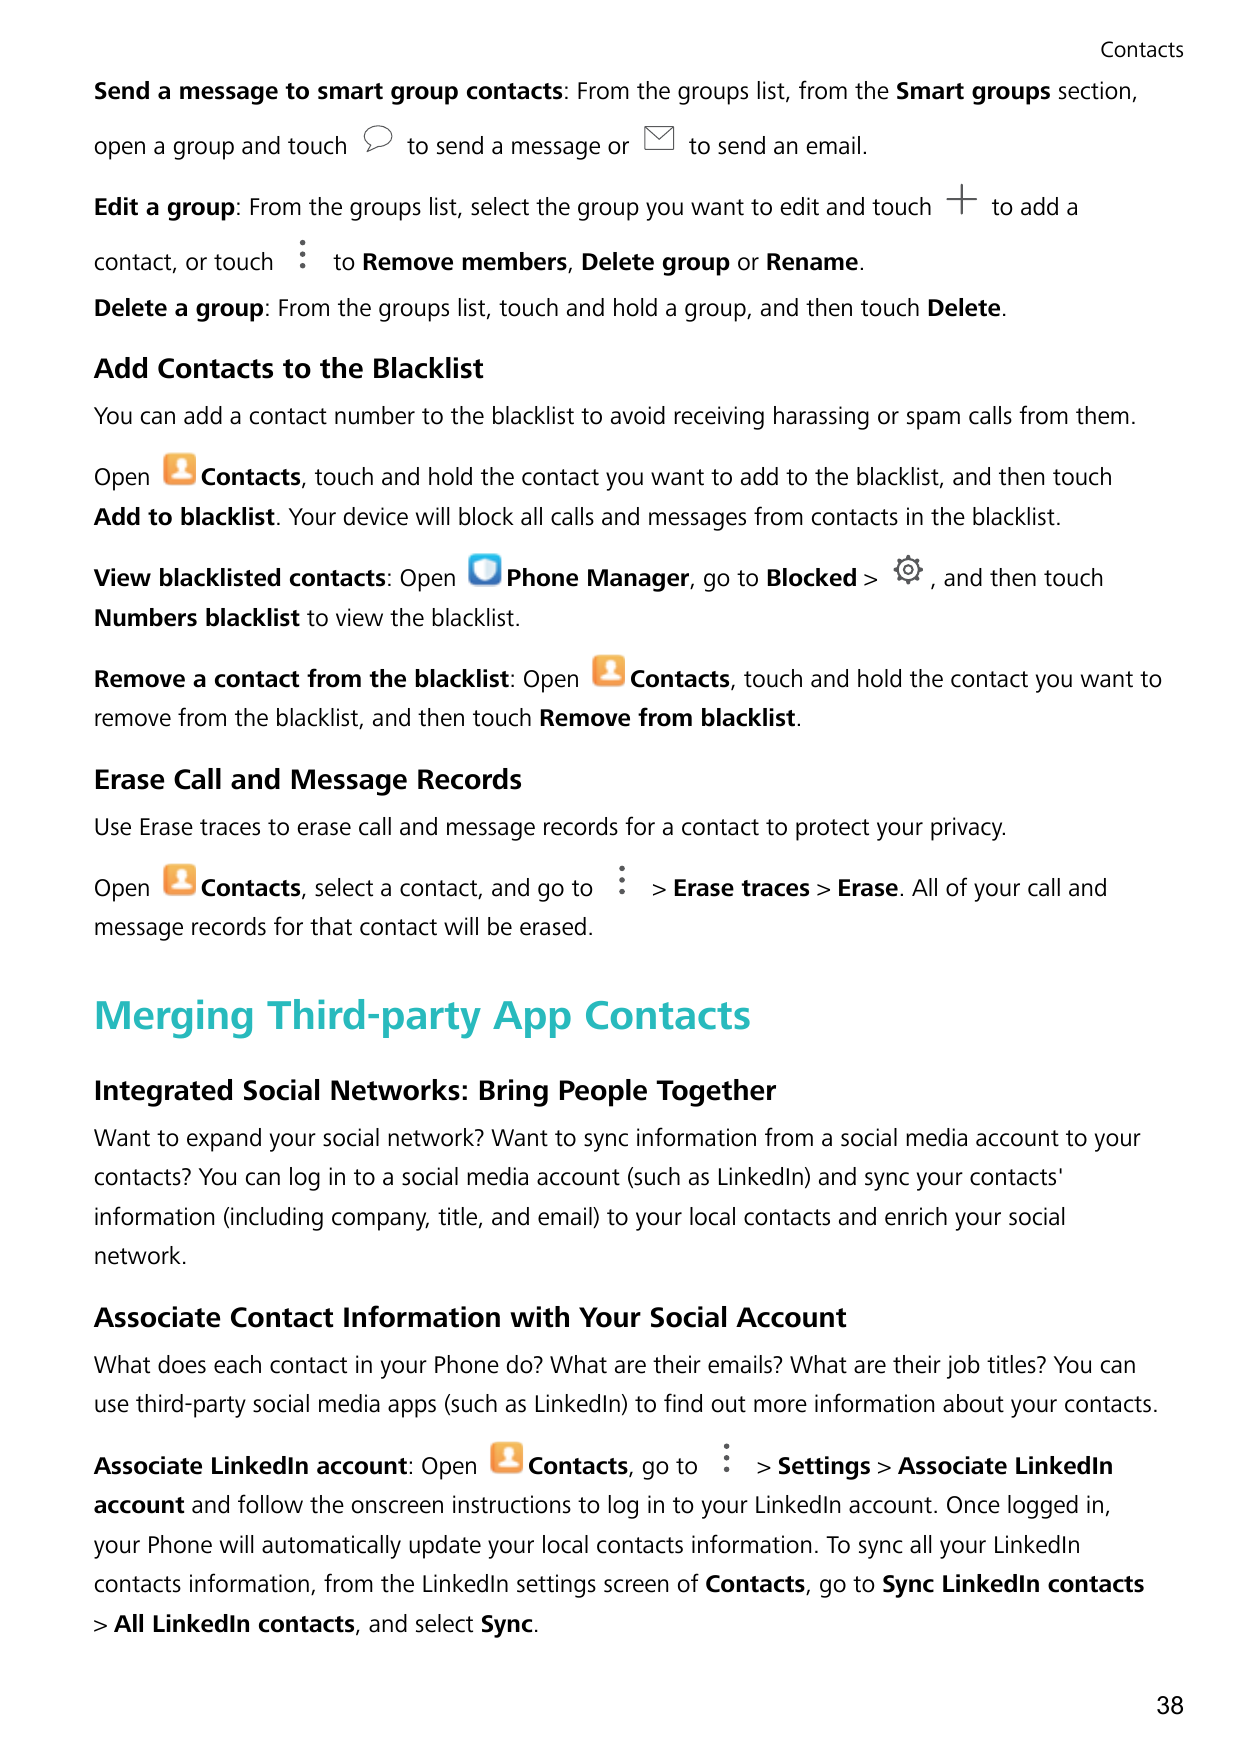 ContactsSend a message to smart group contacts: From the groups list, from the Smart groups section,open a group and touchto sen